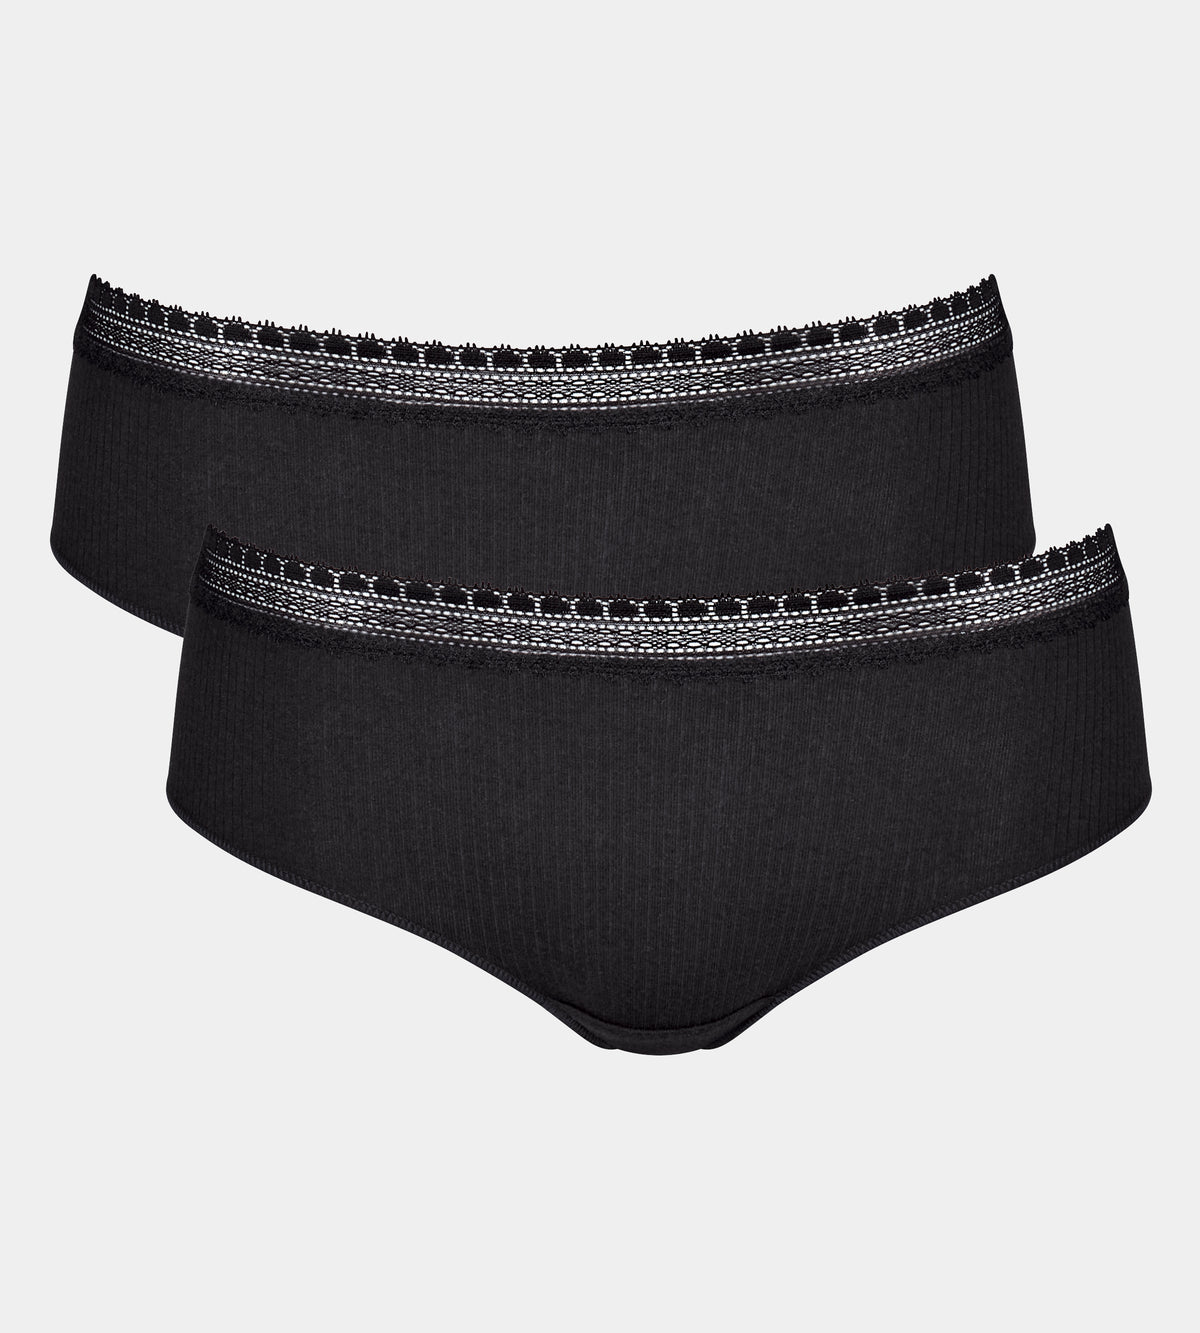 Sloggi GO Ribbed Hipster Briefs Knickers 2 Pack 10213182 Black Twin Pack